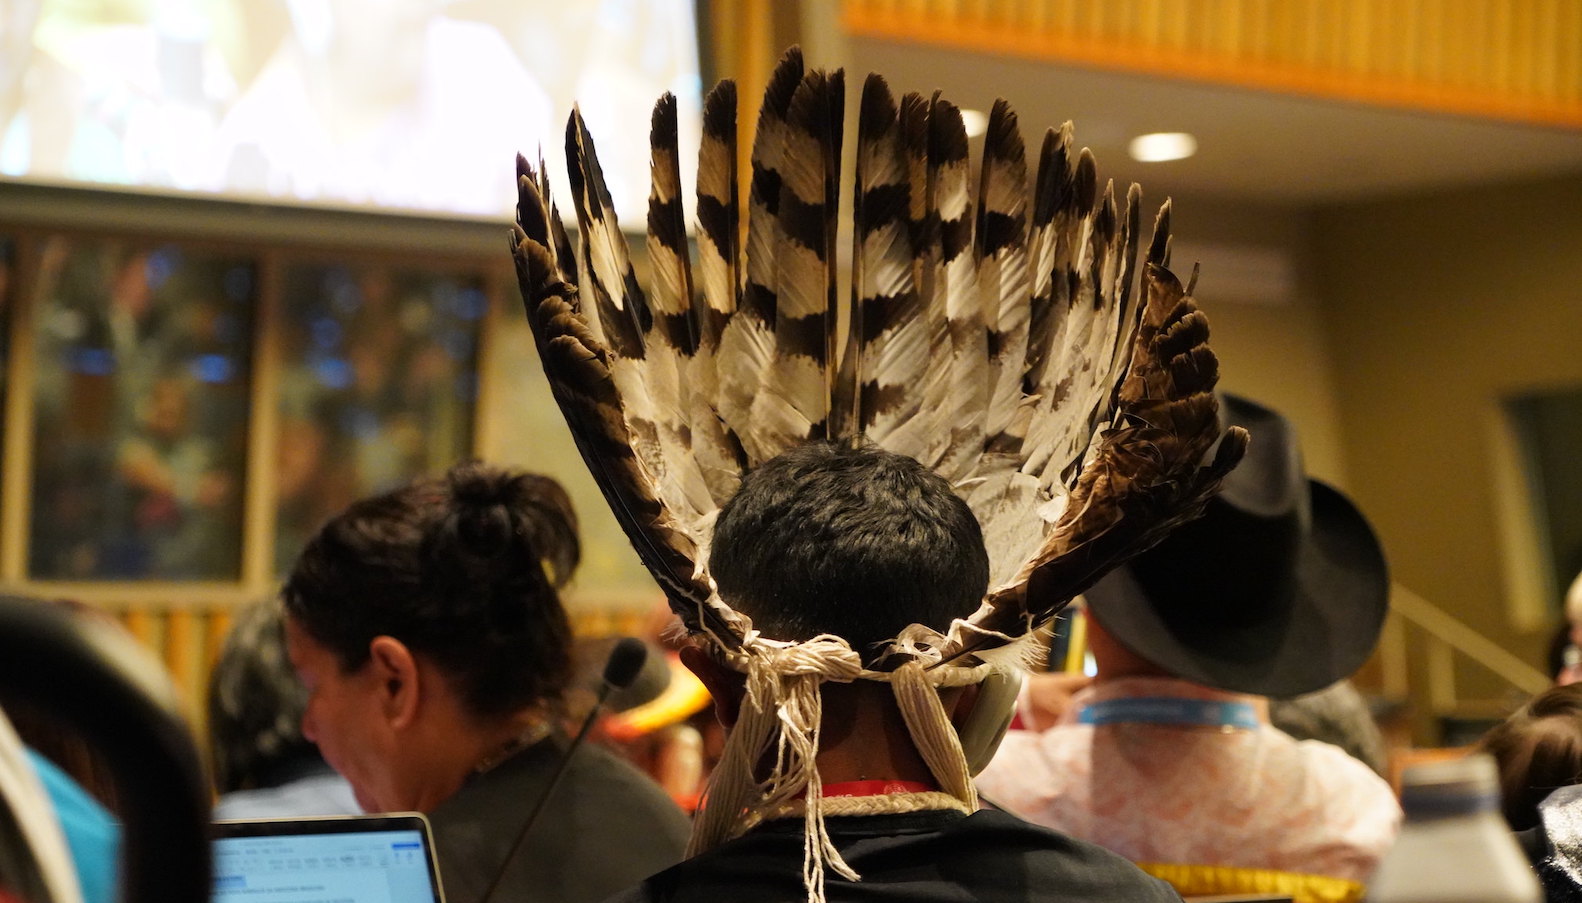 A man faces away from the camera. He wears an elaborate feathered headdress and looks toward a large projector screen